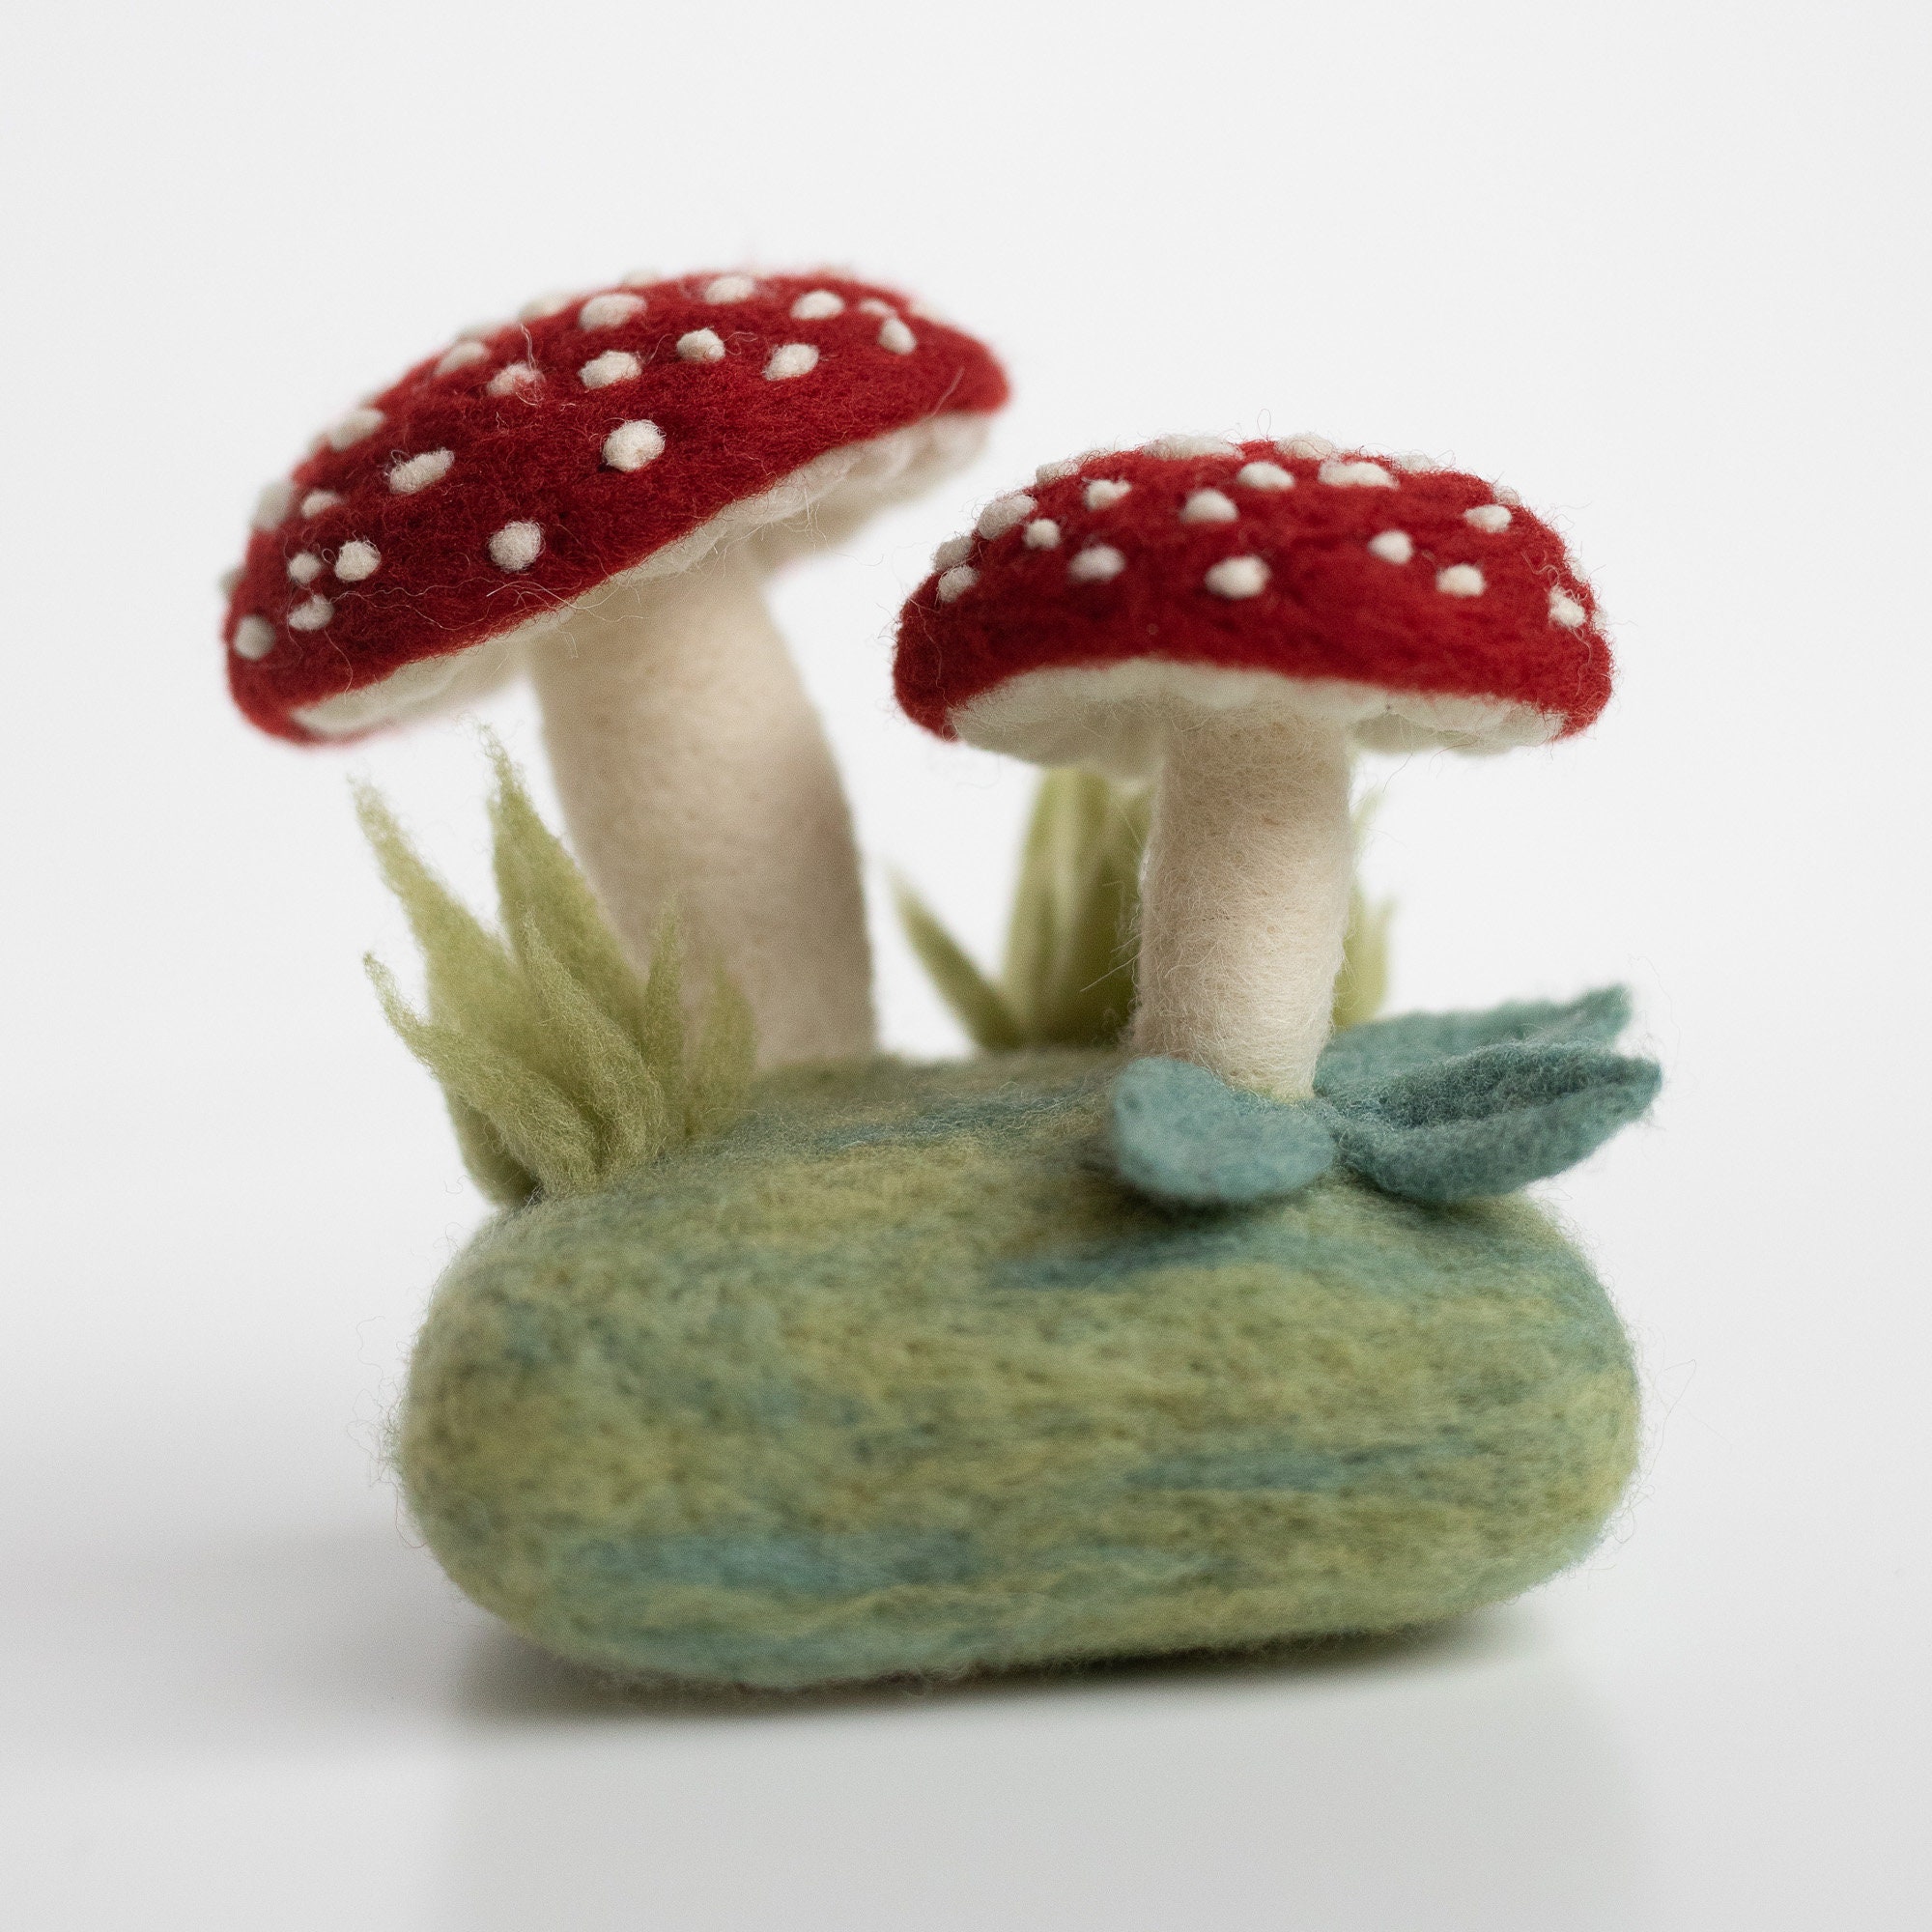 How to Make a Needle-Felted Mushroom - Curly Birds